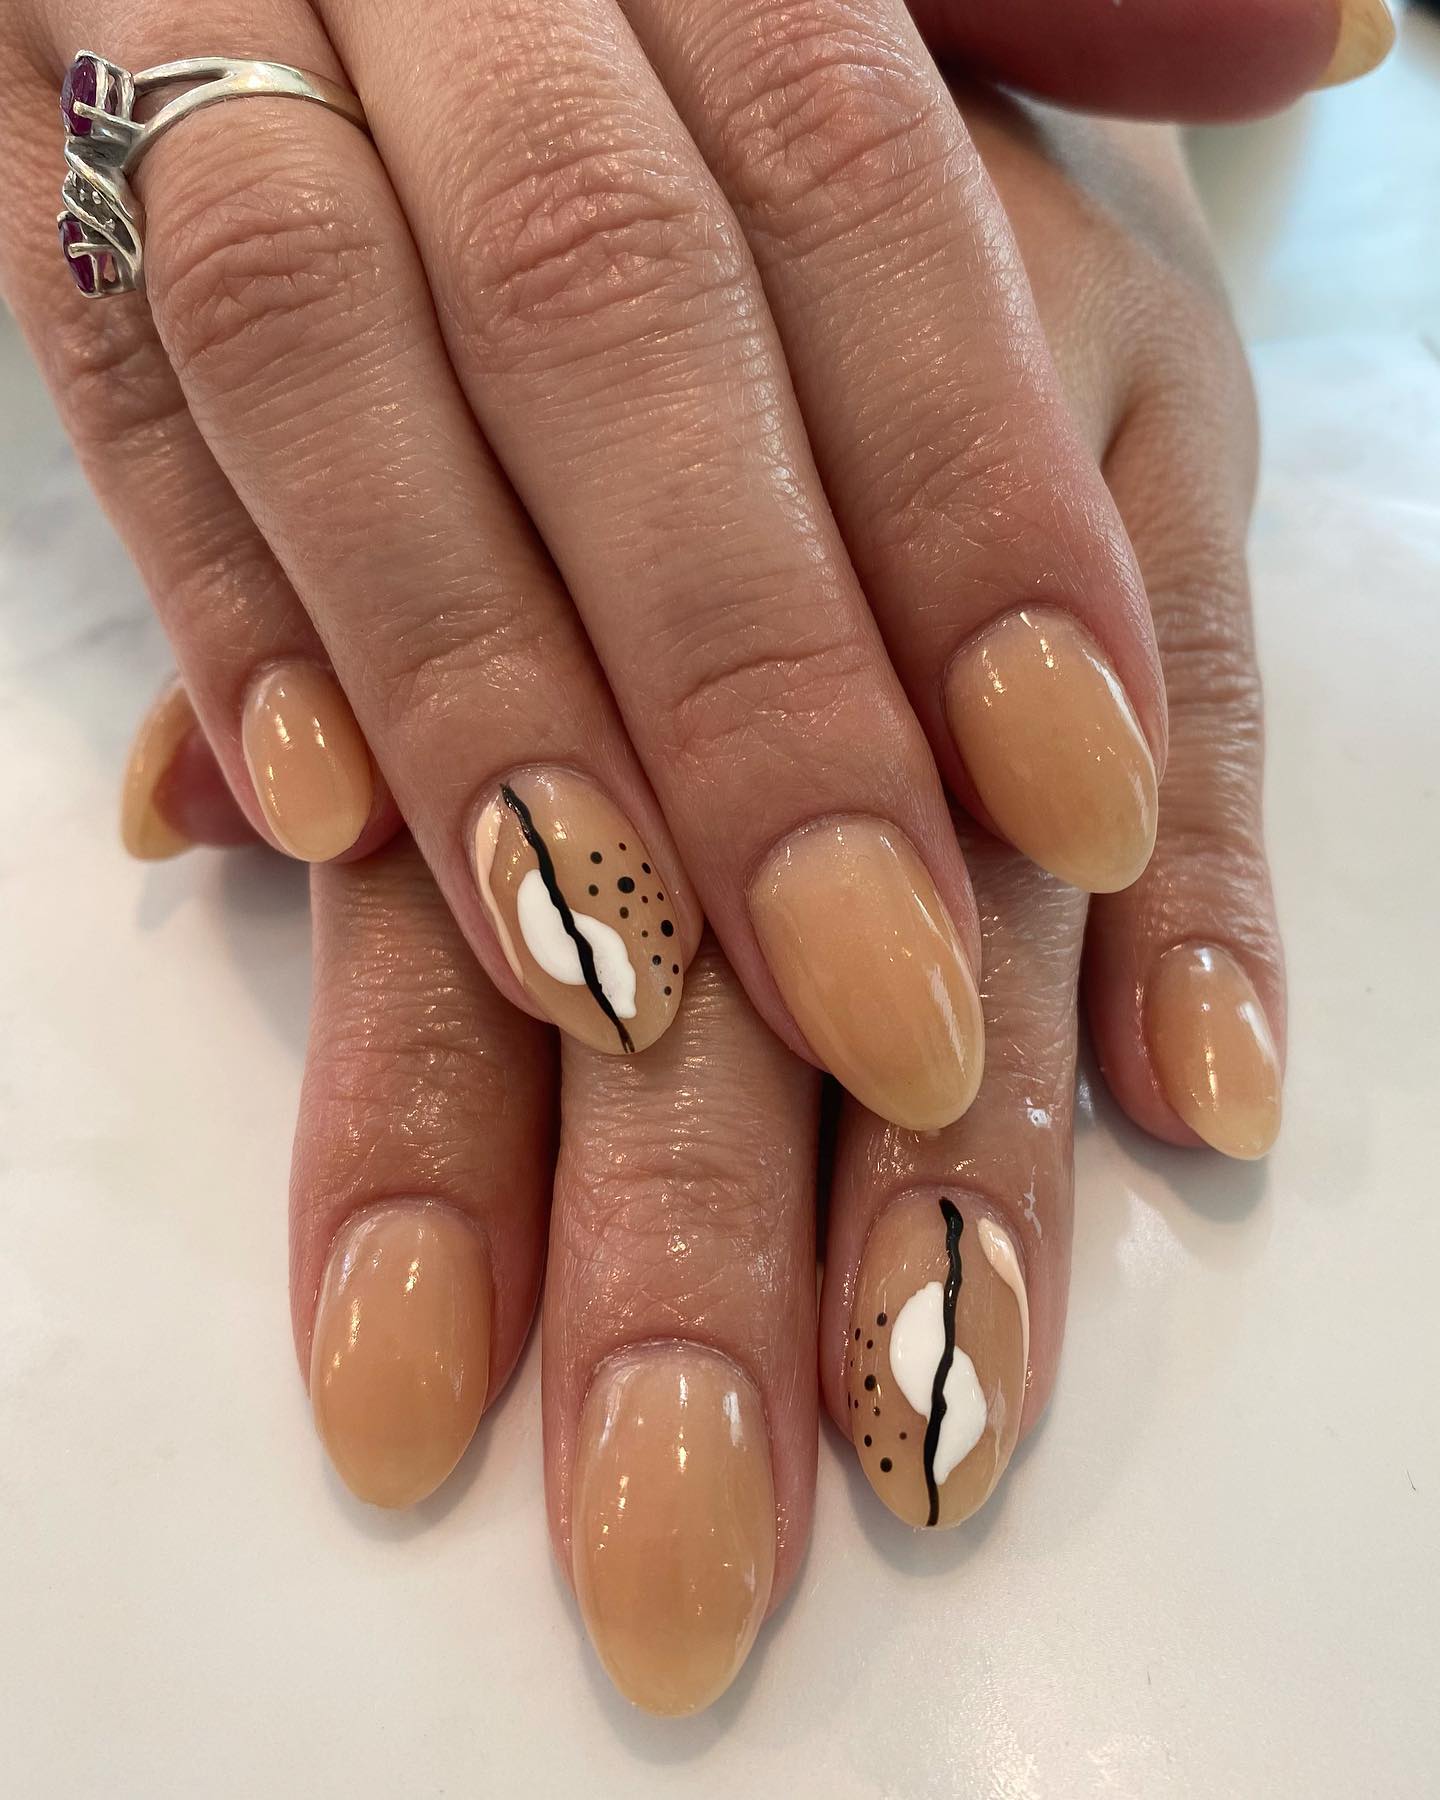 How about wearing some abstract forms as accent nails to take your nude nails to a new level? Just go for it.